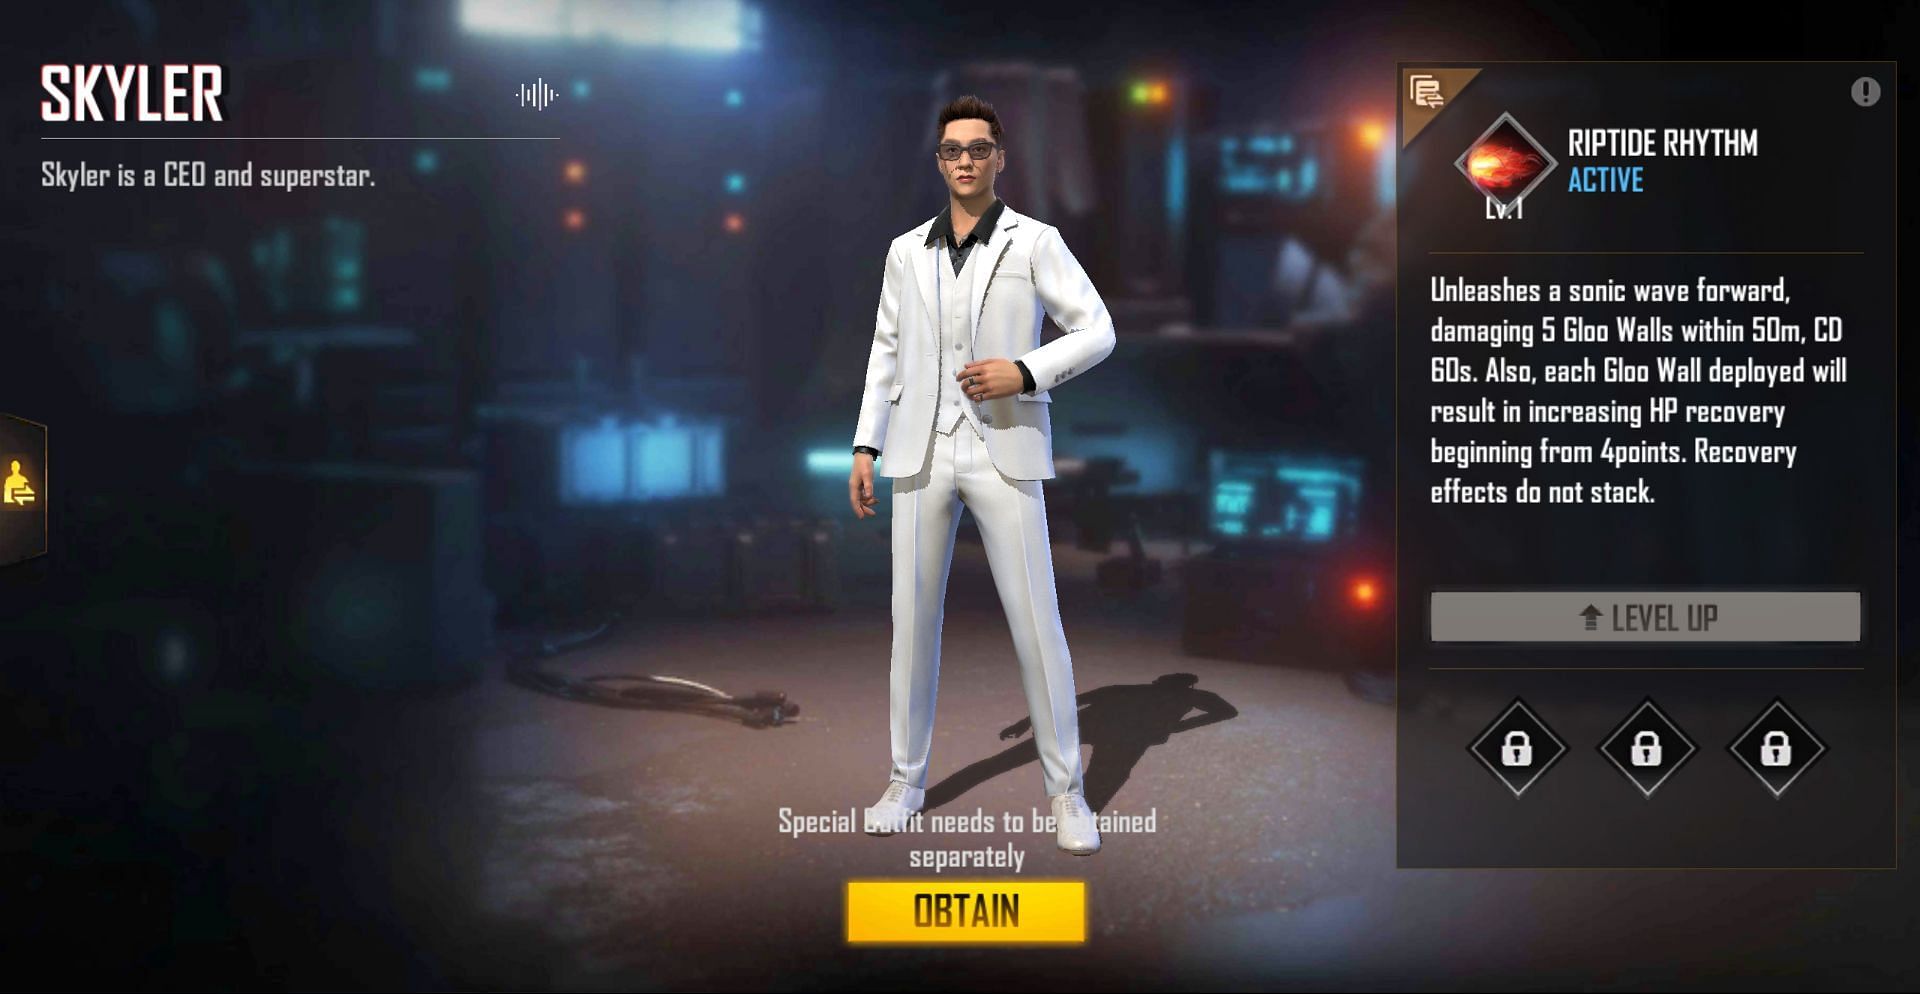 Skyler can be purchased for 499 diamonds (Image via Free Fire)